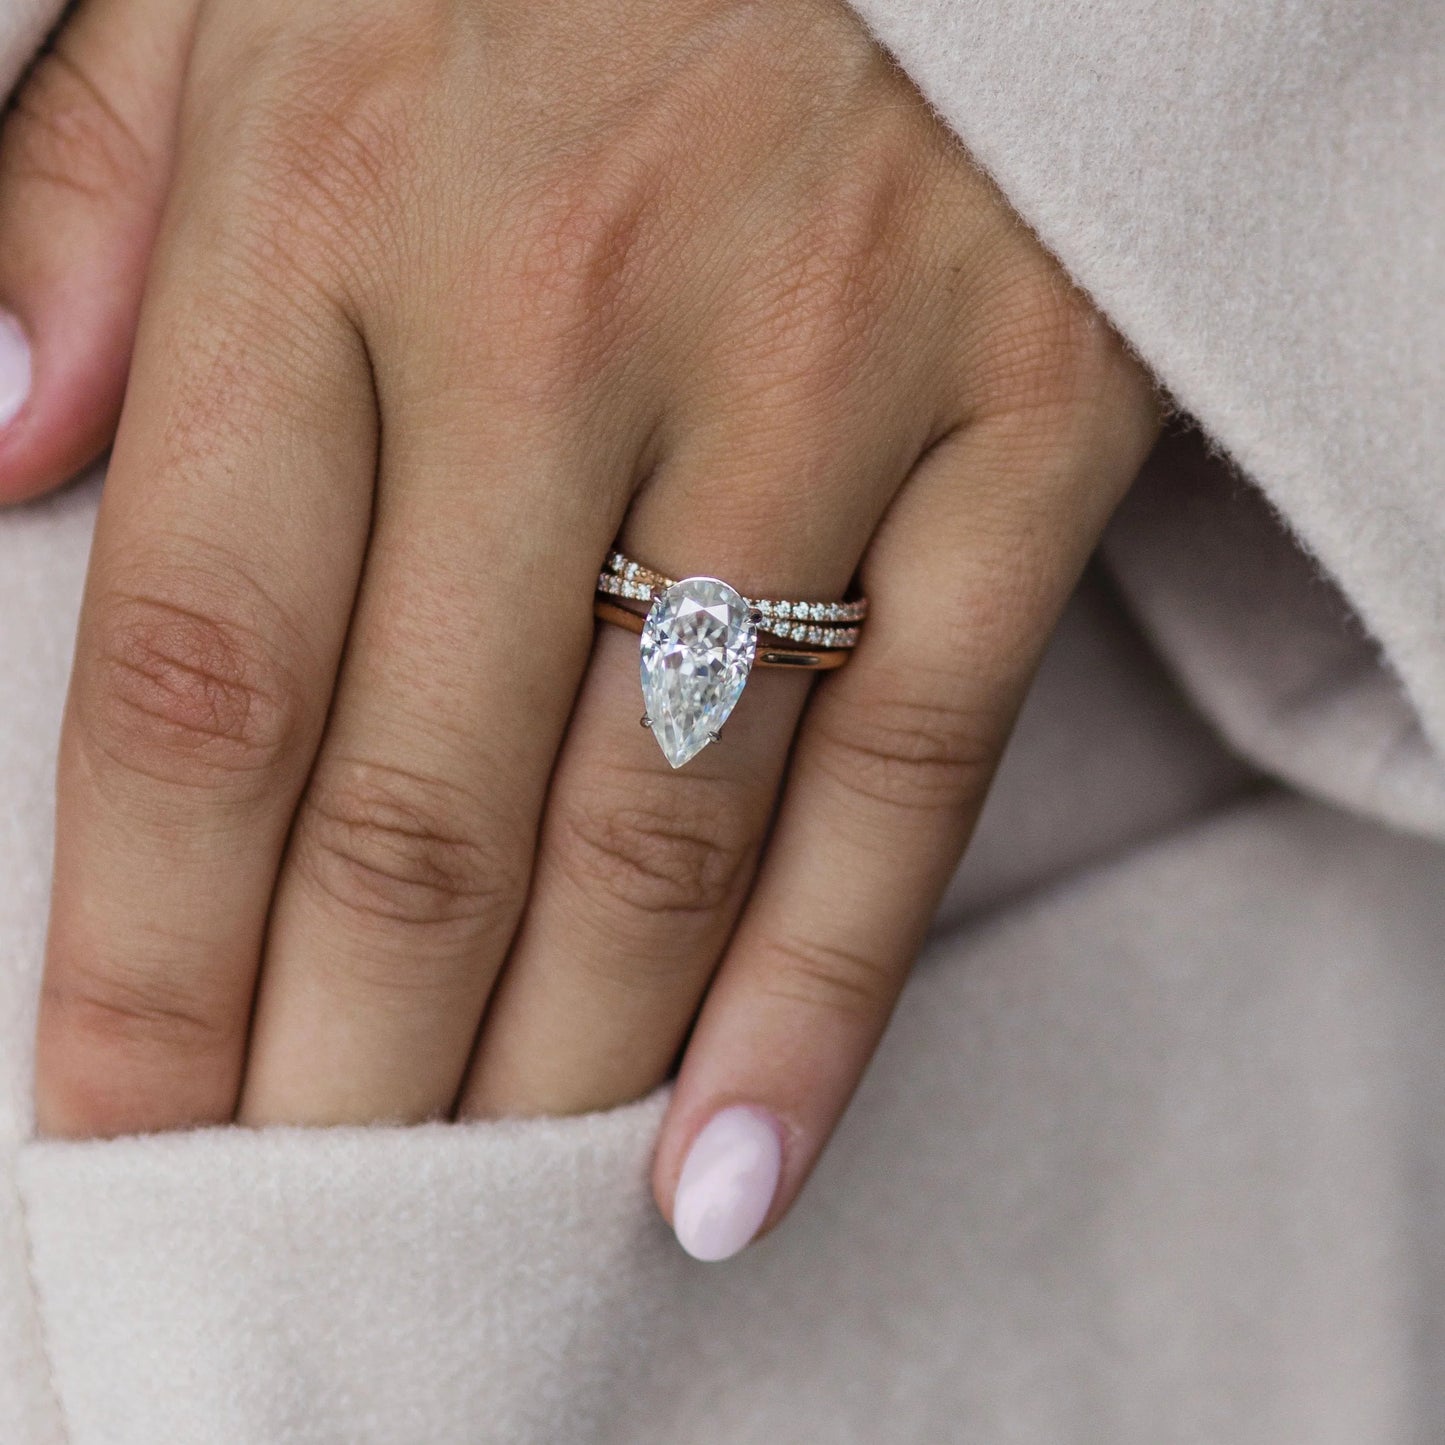 3 Carat Pear Cut Moissanite Diamond Engagement Ring with a Solitaire Band and Shoulder Accents